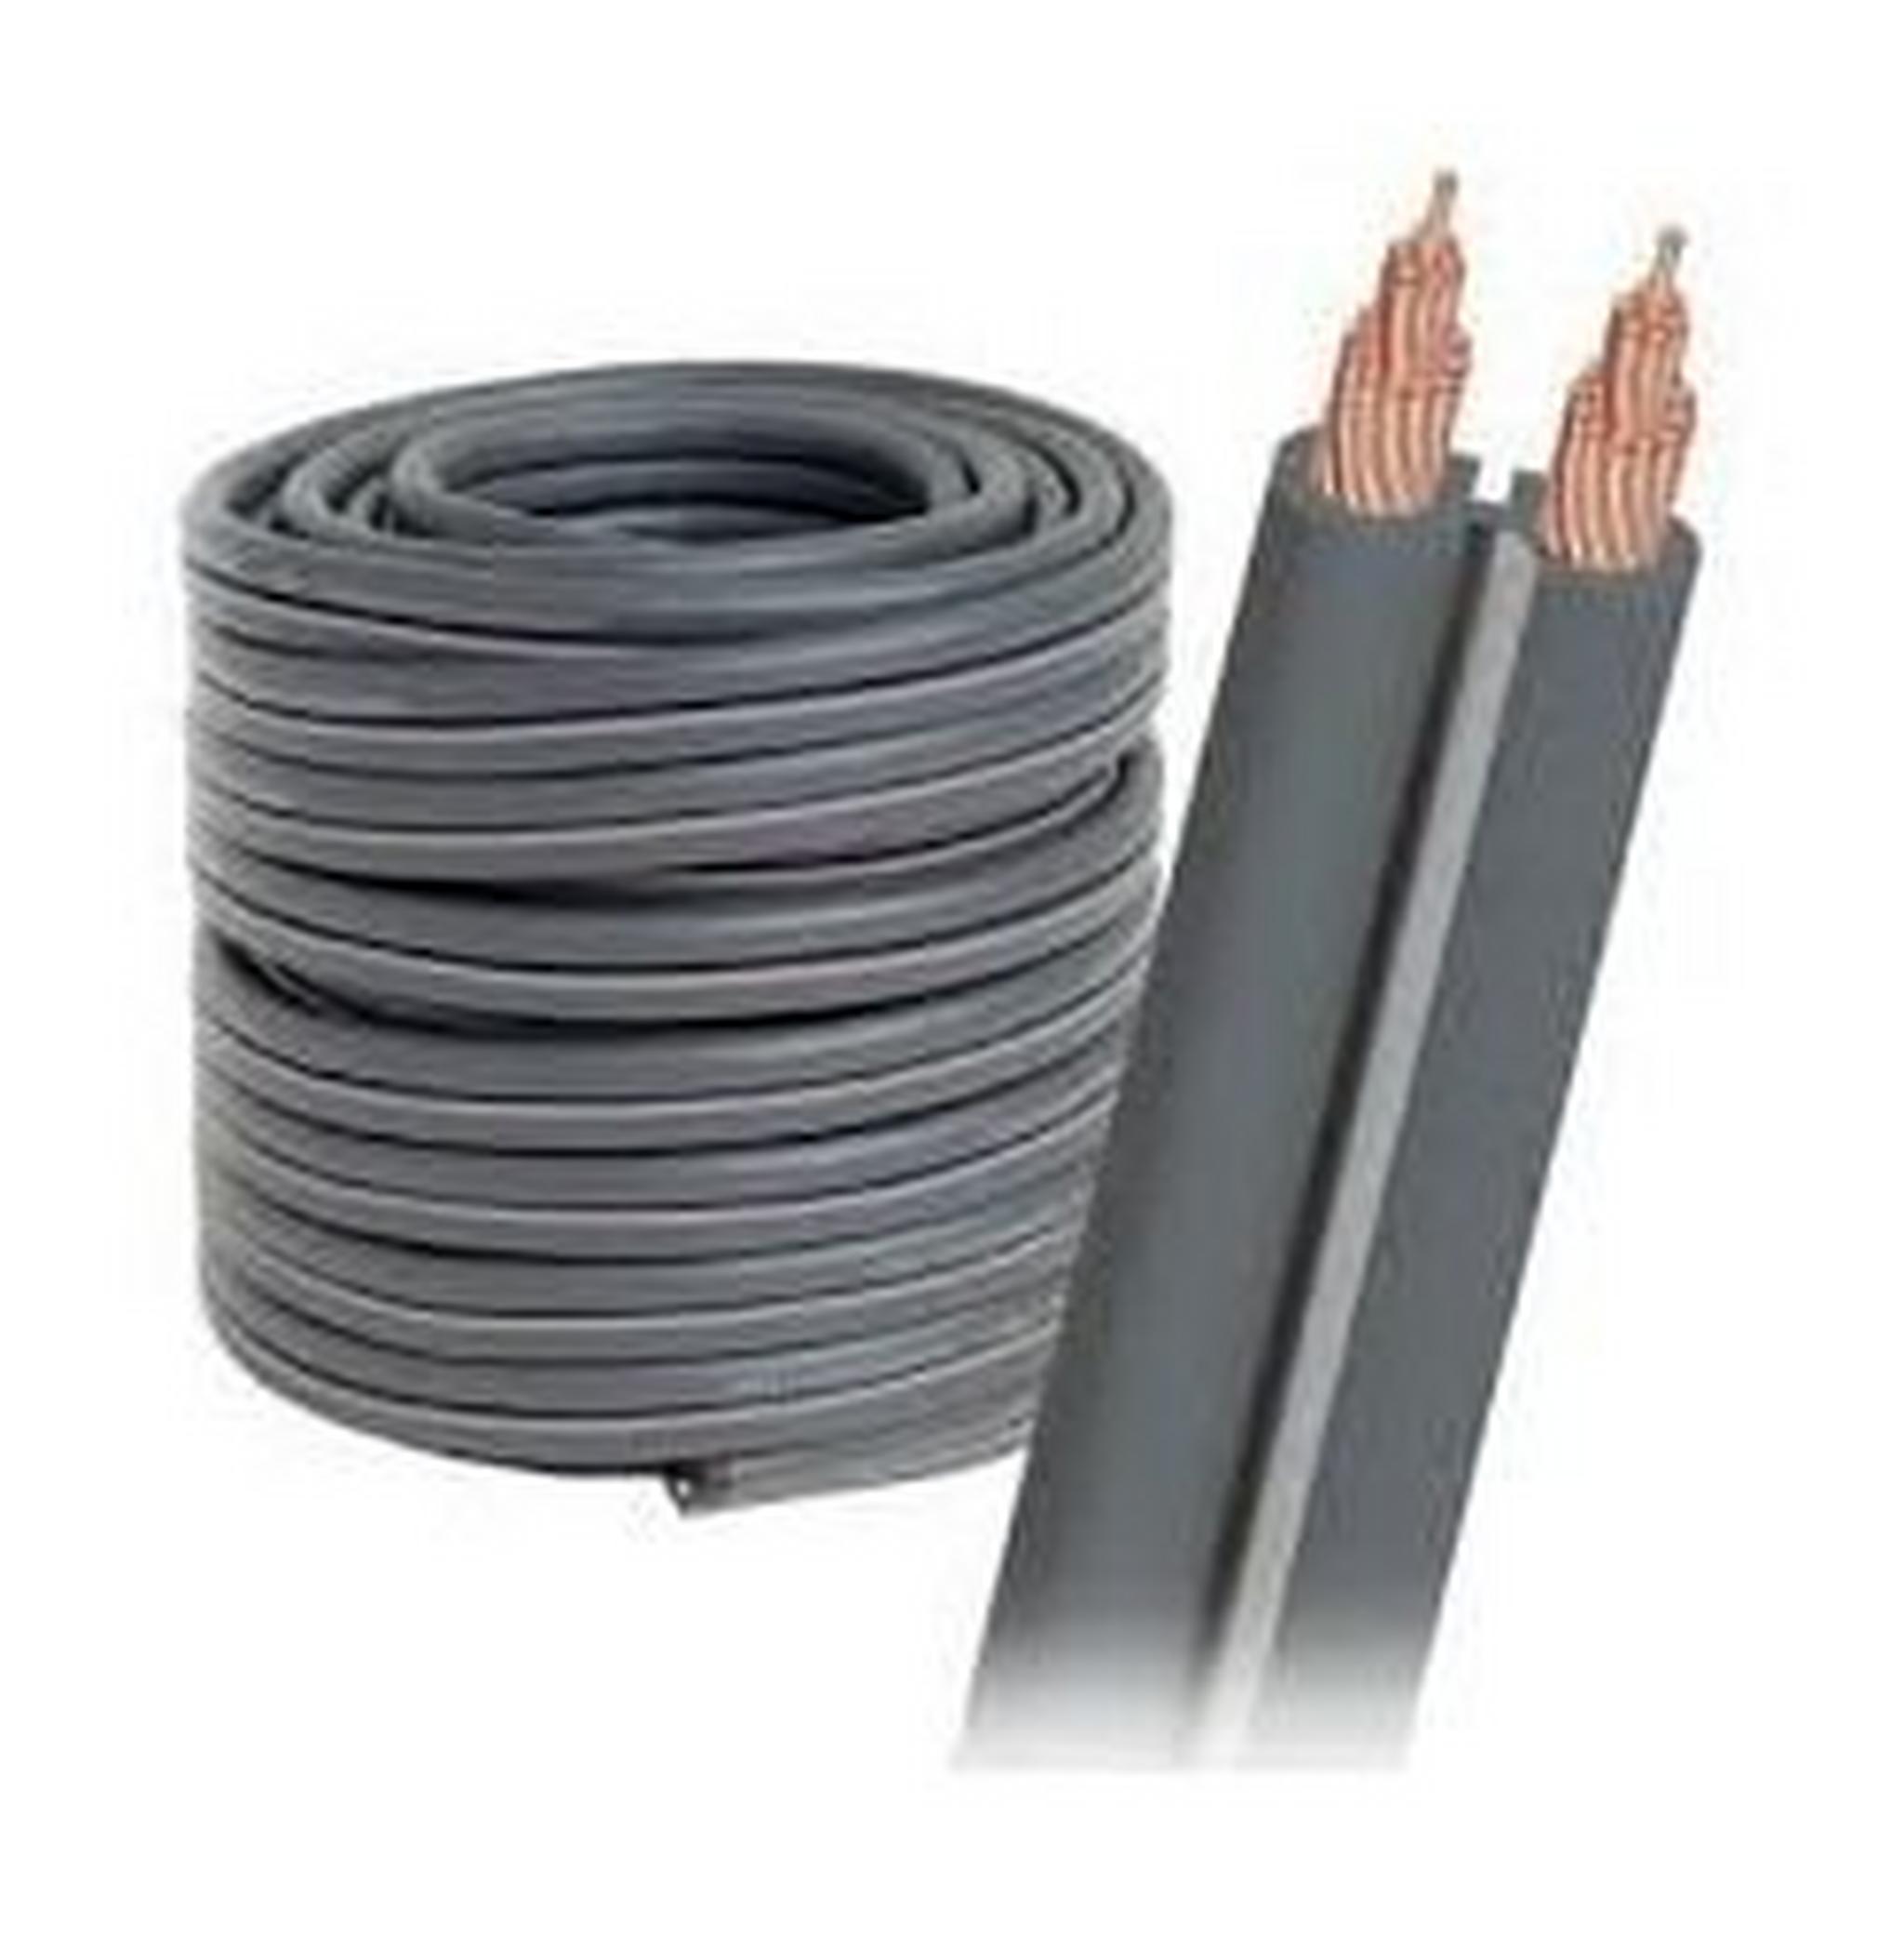 AudioQuest G2 Speaker Cable 100 feet - Grey